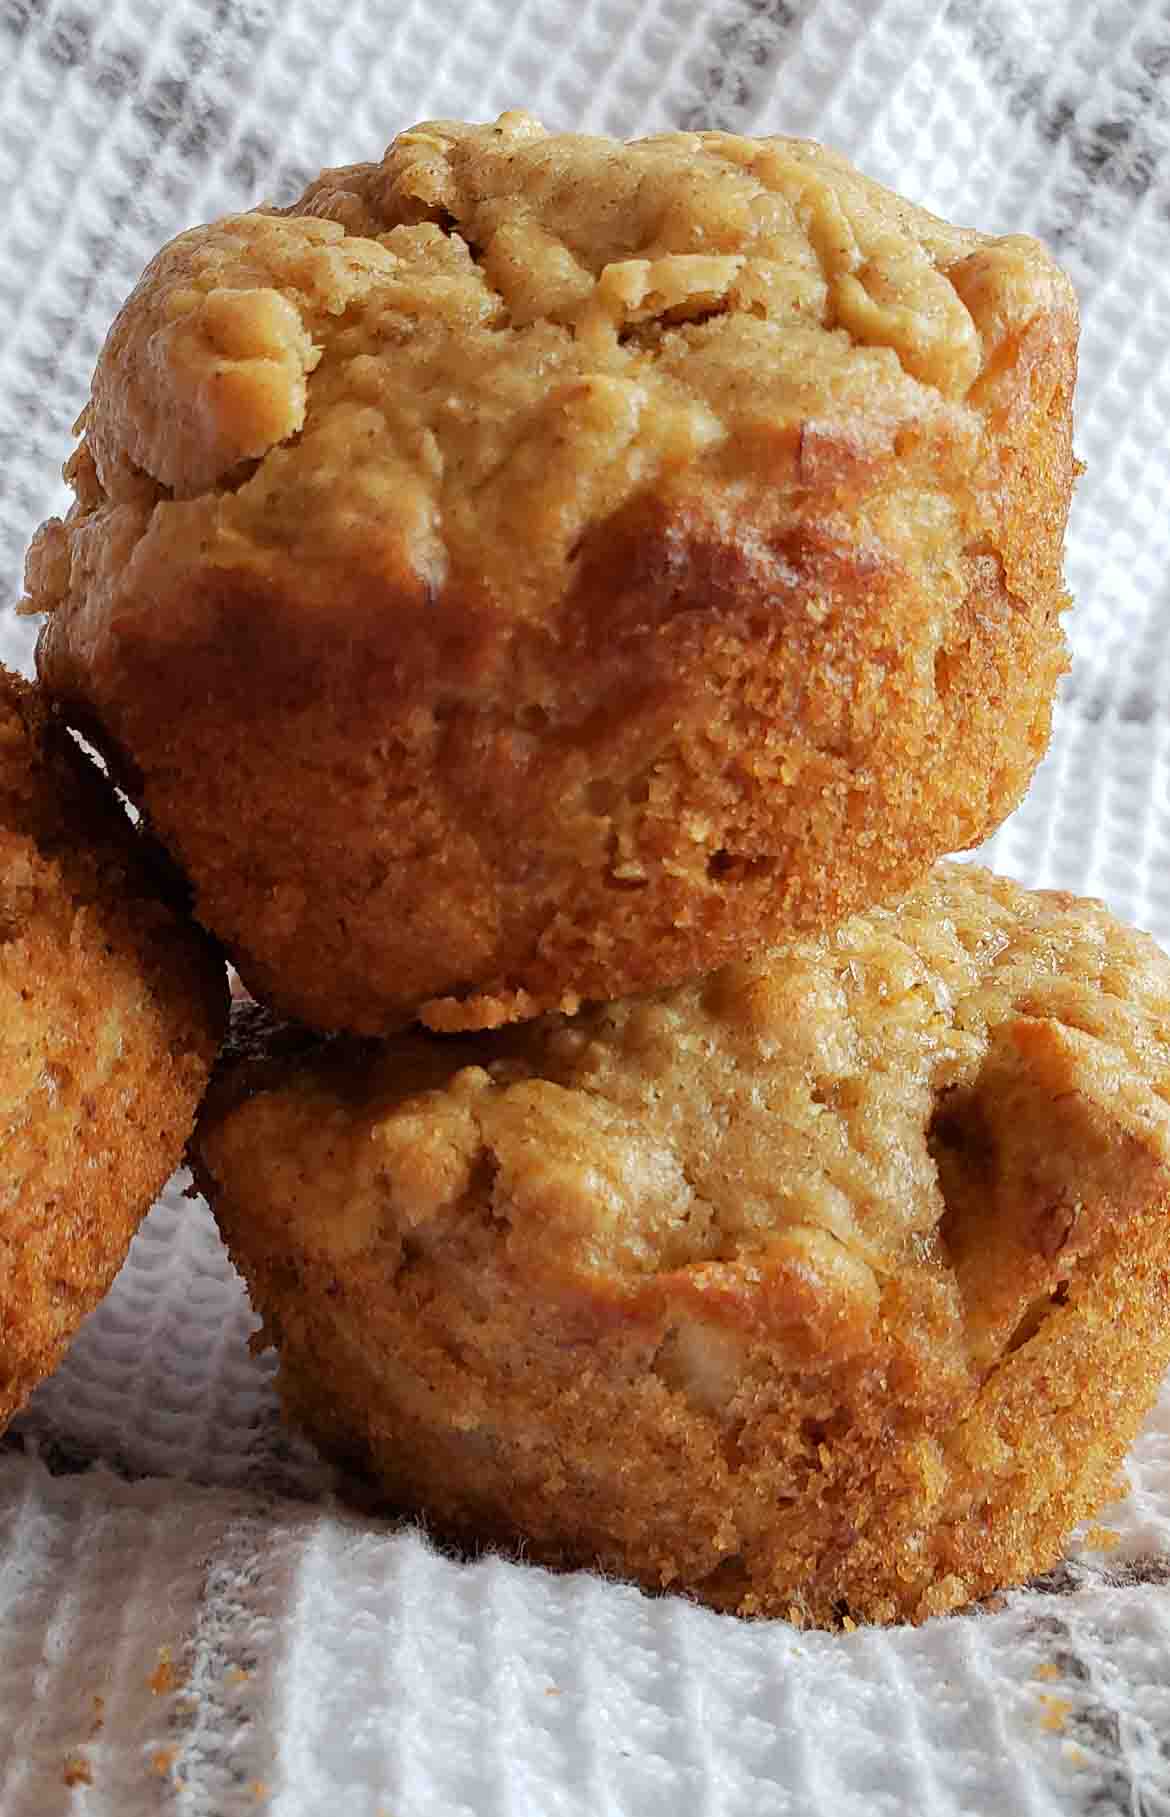 Sour Cream Apple Muffins with cinnamon